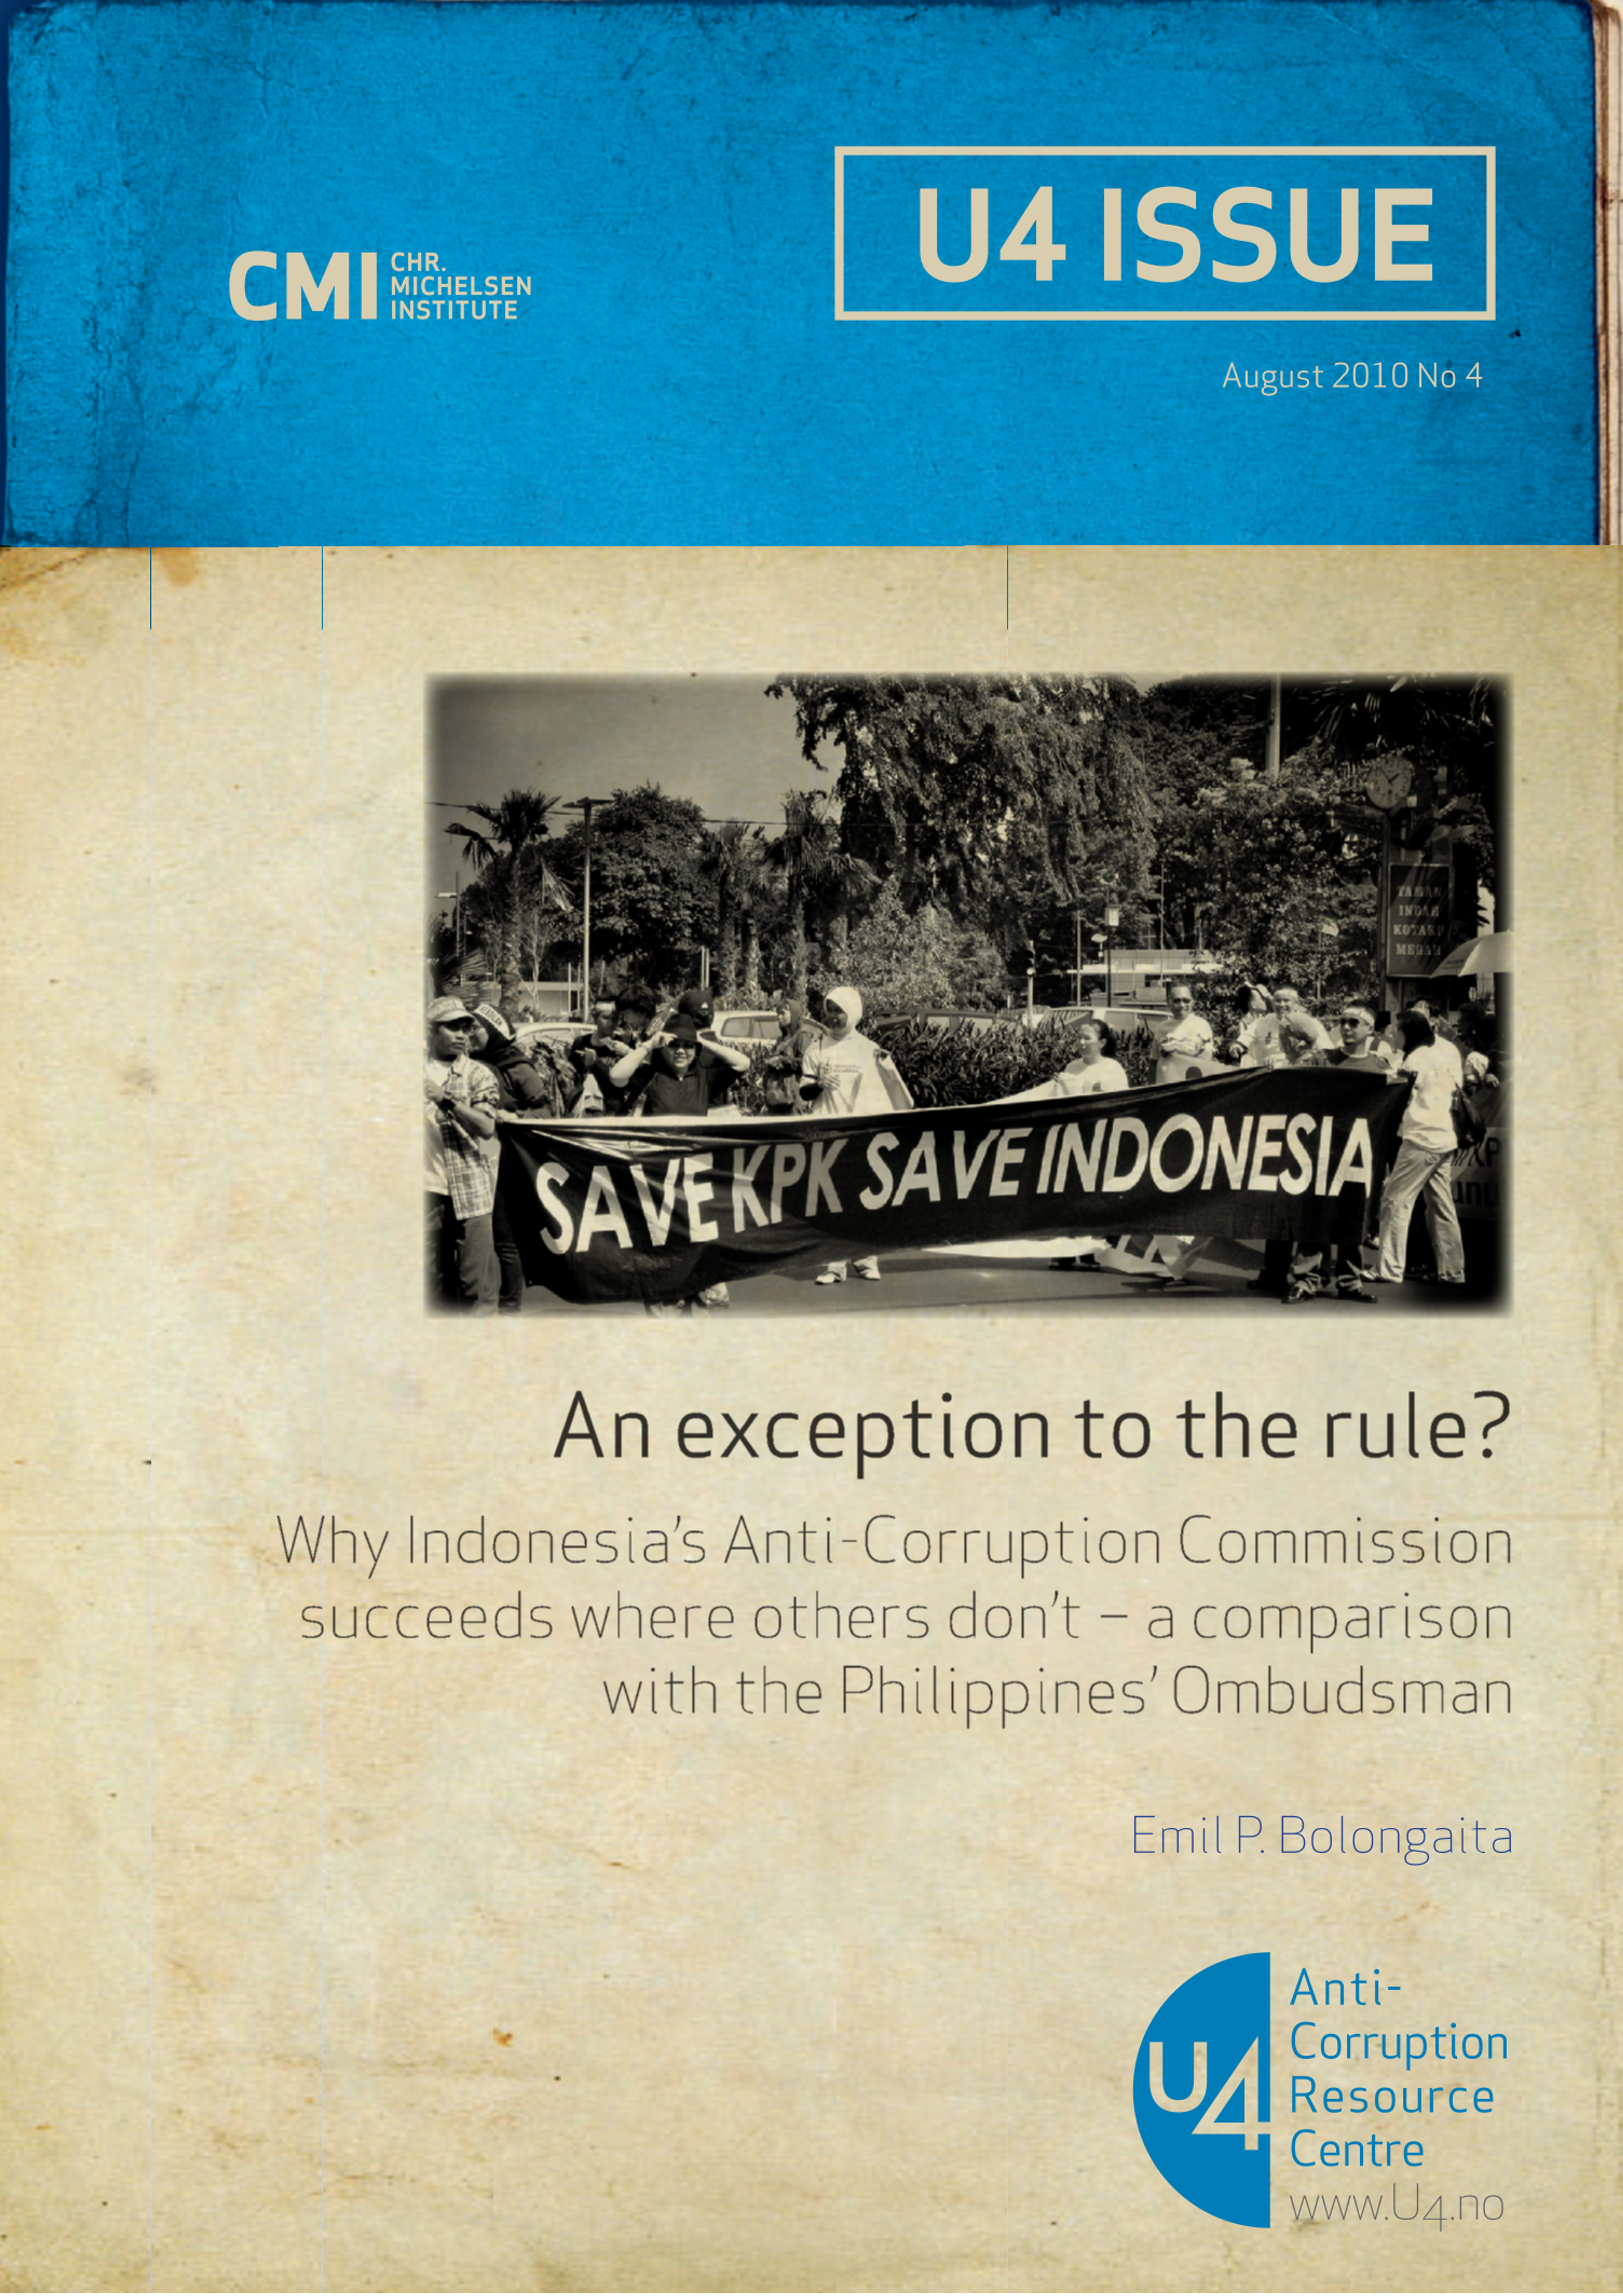 An exception to the rule? Why Indonesia's Anti-Corruption Commission succeeds where others don't - a comparison with the Philippines' Ombudsman